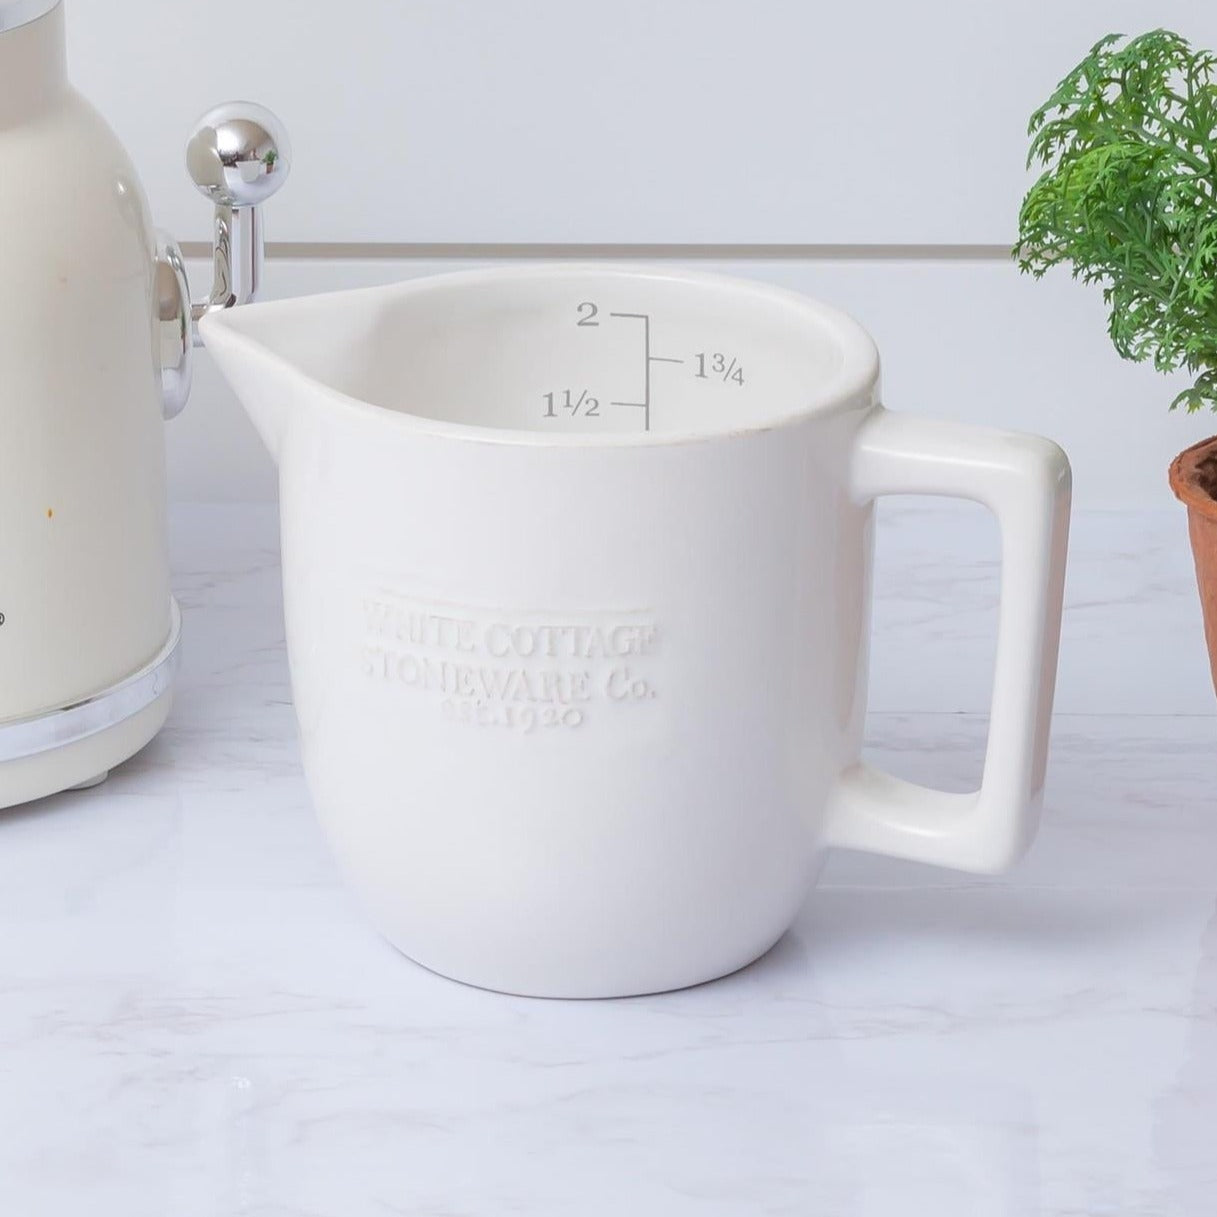 HTG Measuring Cups - Cheap Measuring Cups for Gardening